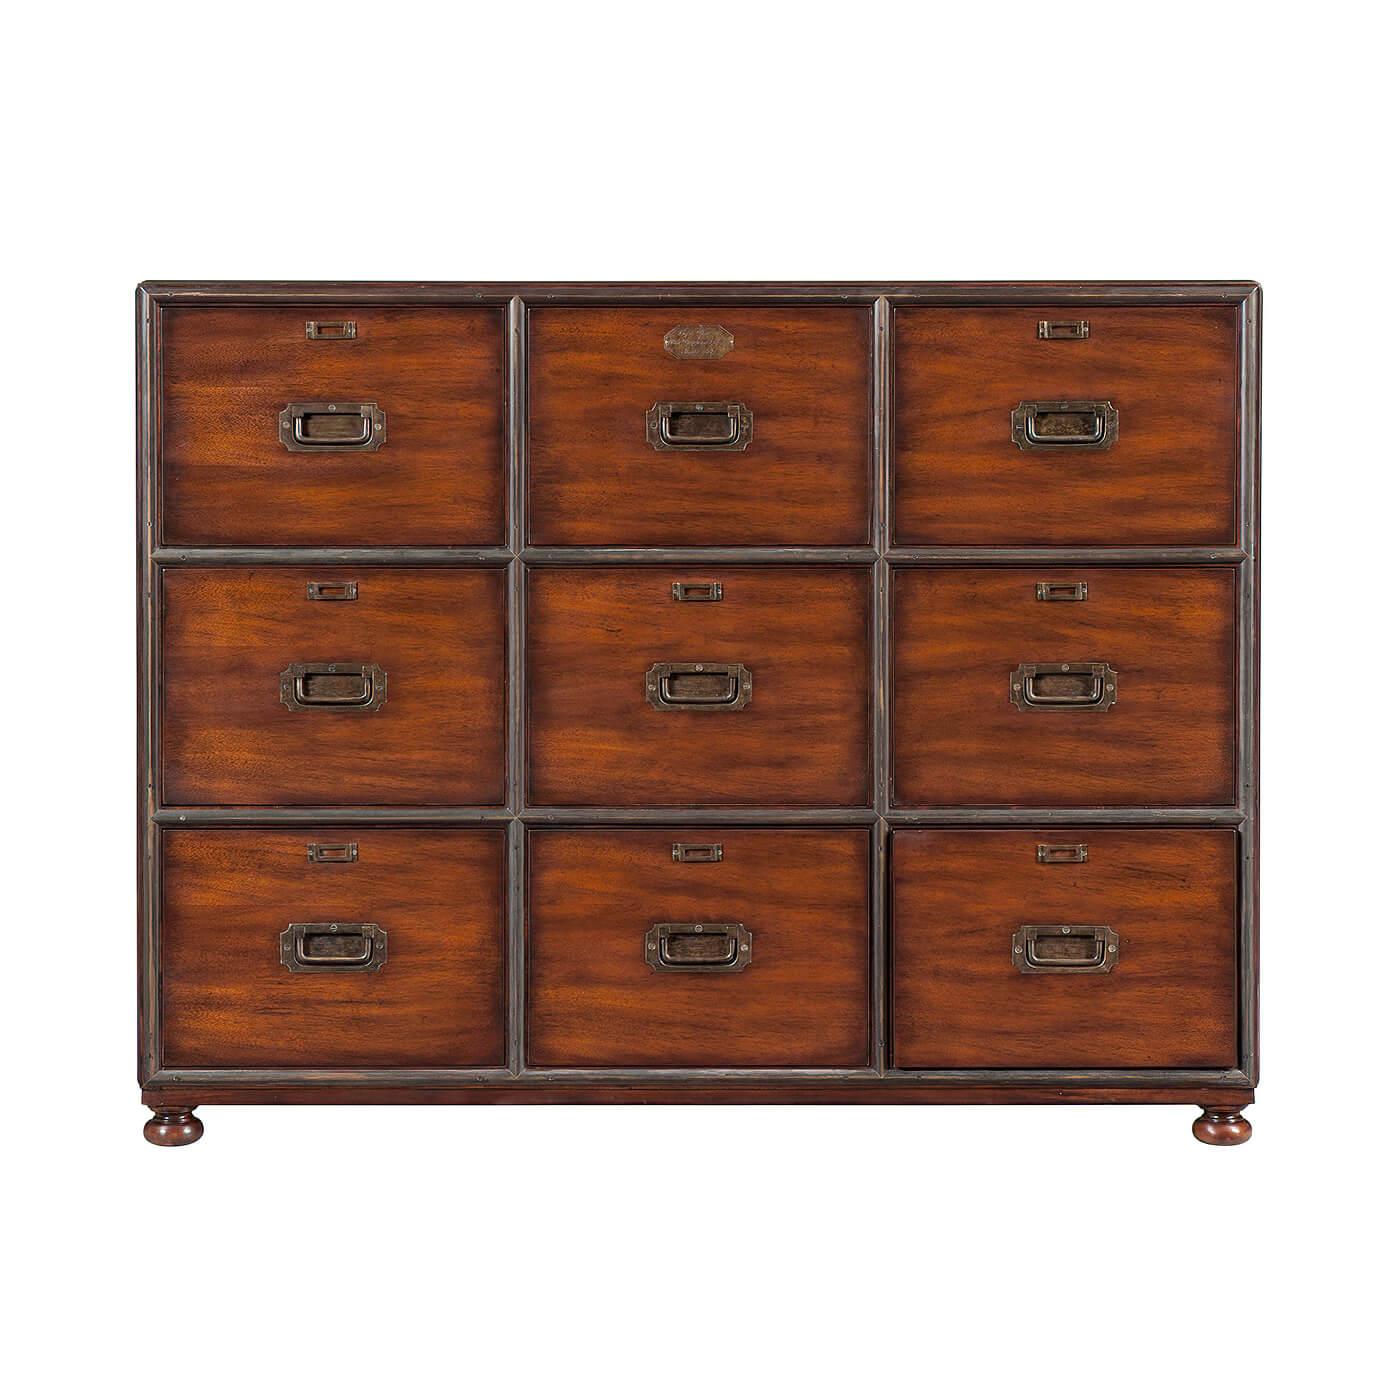 An English Campaign style and brass filing chest of drawers, with nine drawers, on bun feet. Suitable for A4 and Letter Hanging Folders.

Dimensions: 51